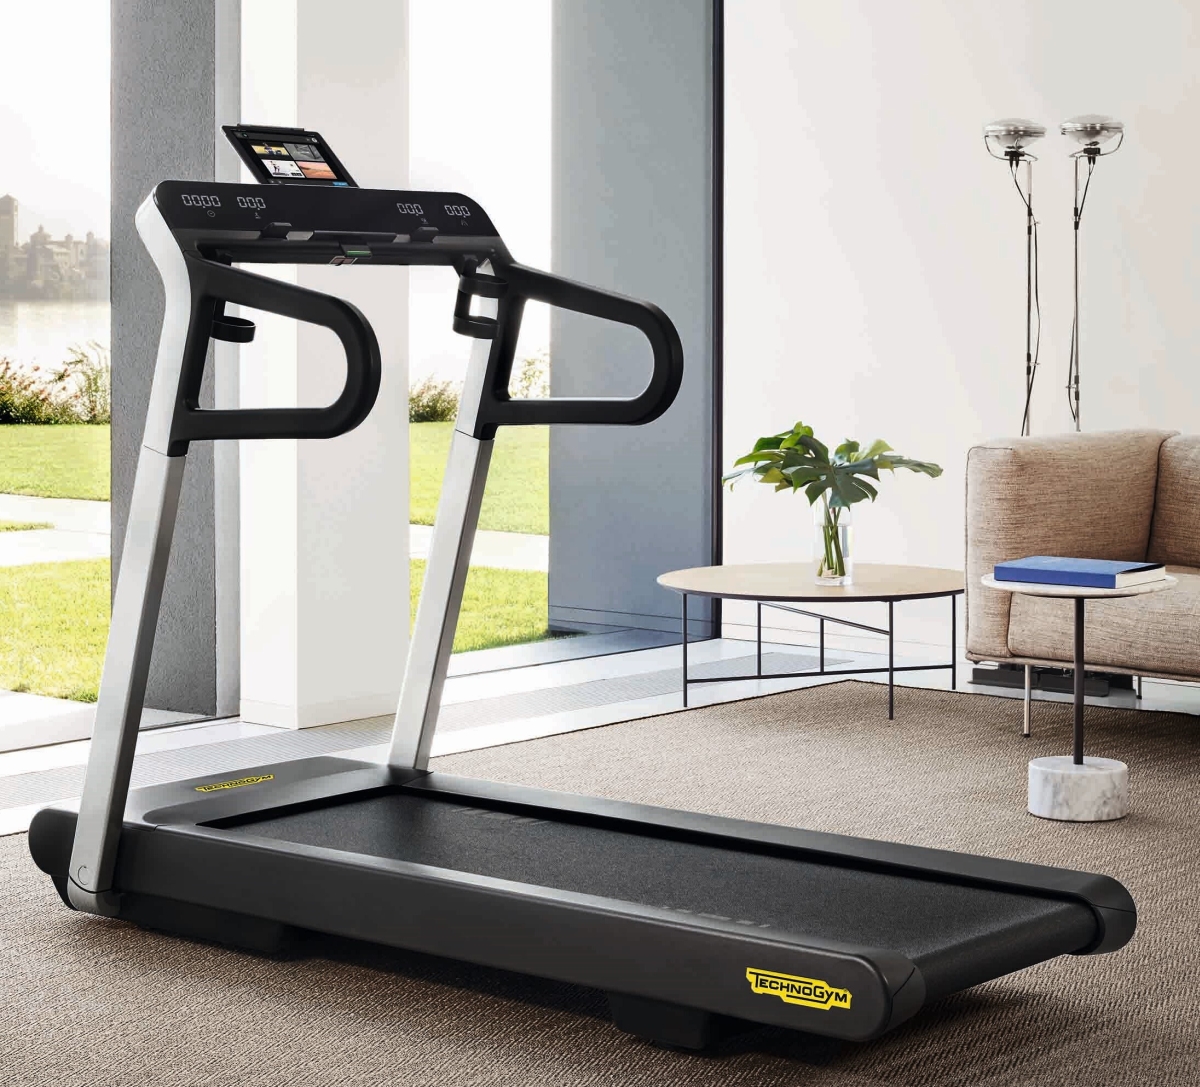 The Technogym MyRun is a treadmill that works with your ...